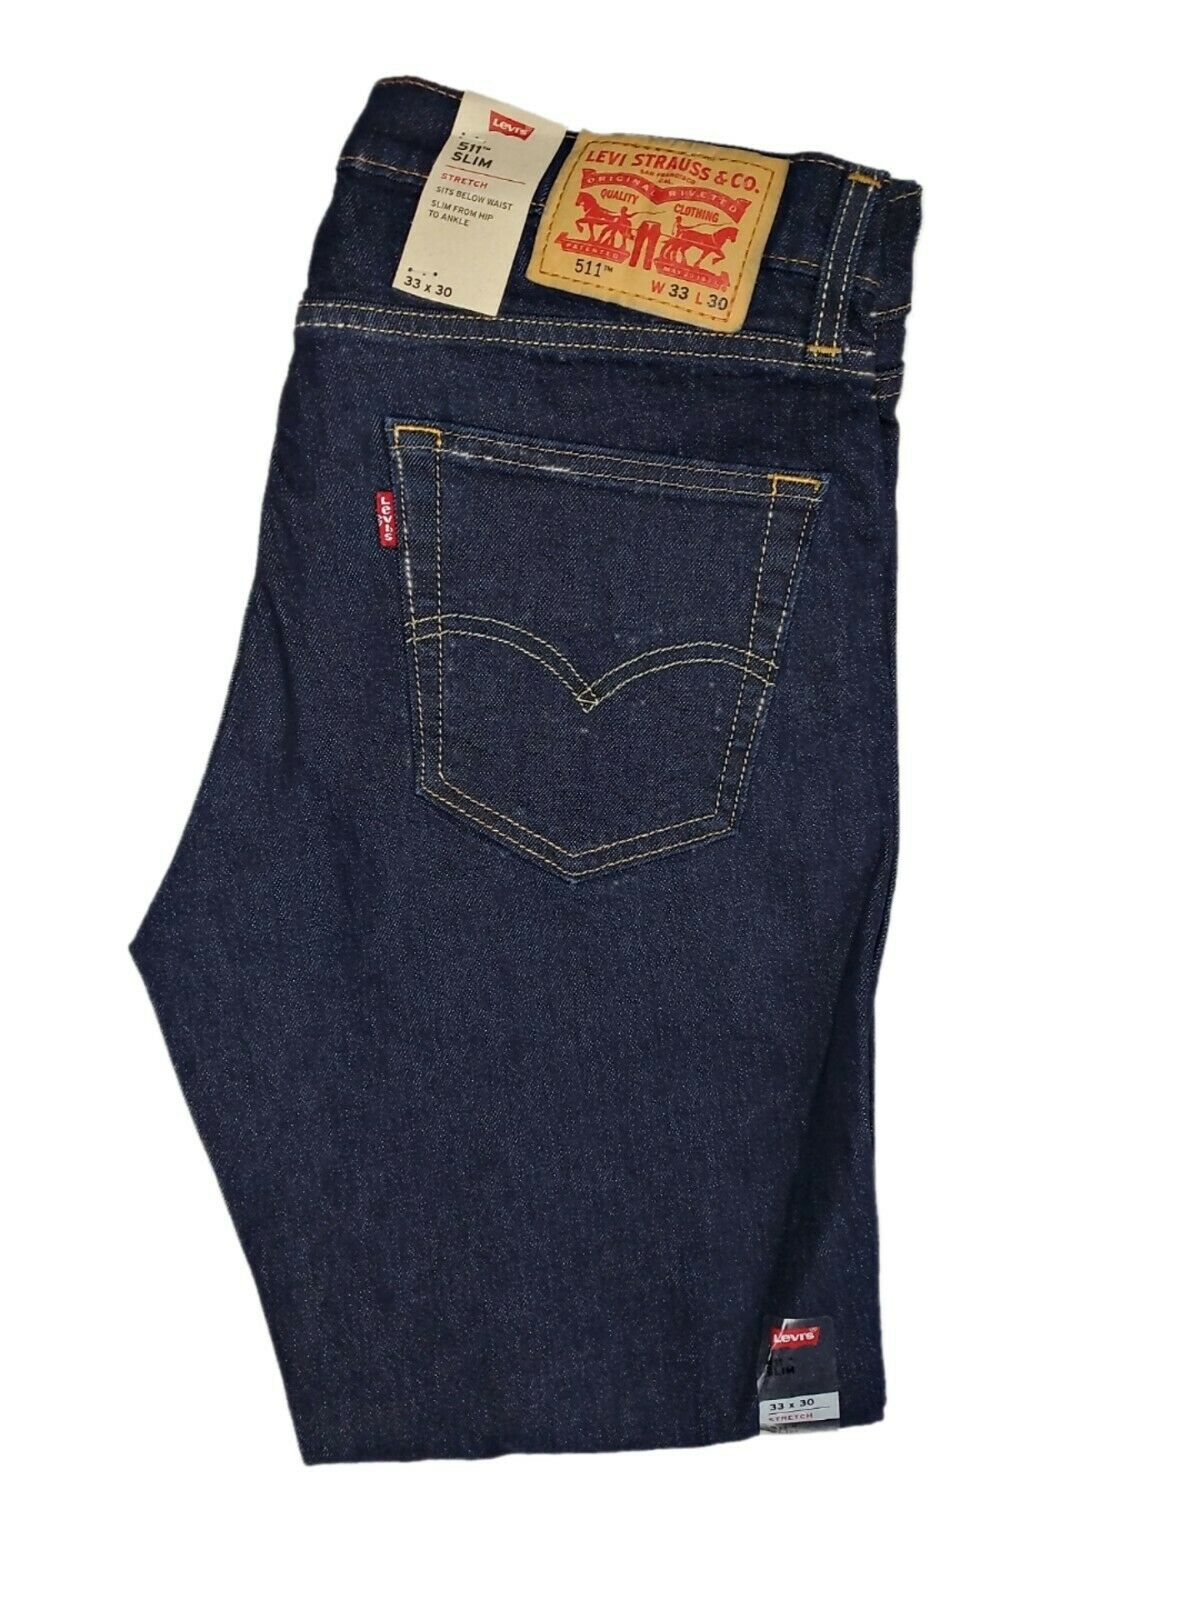 levi's flannel jeans